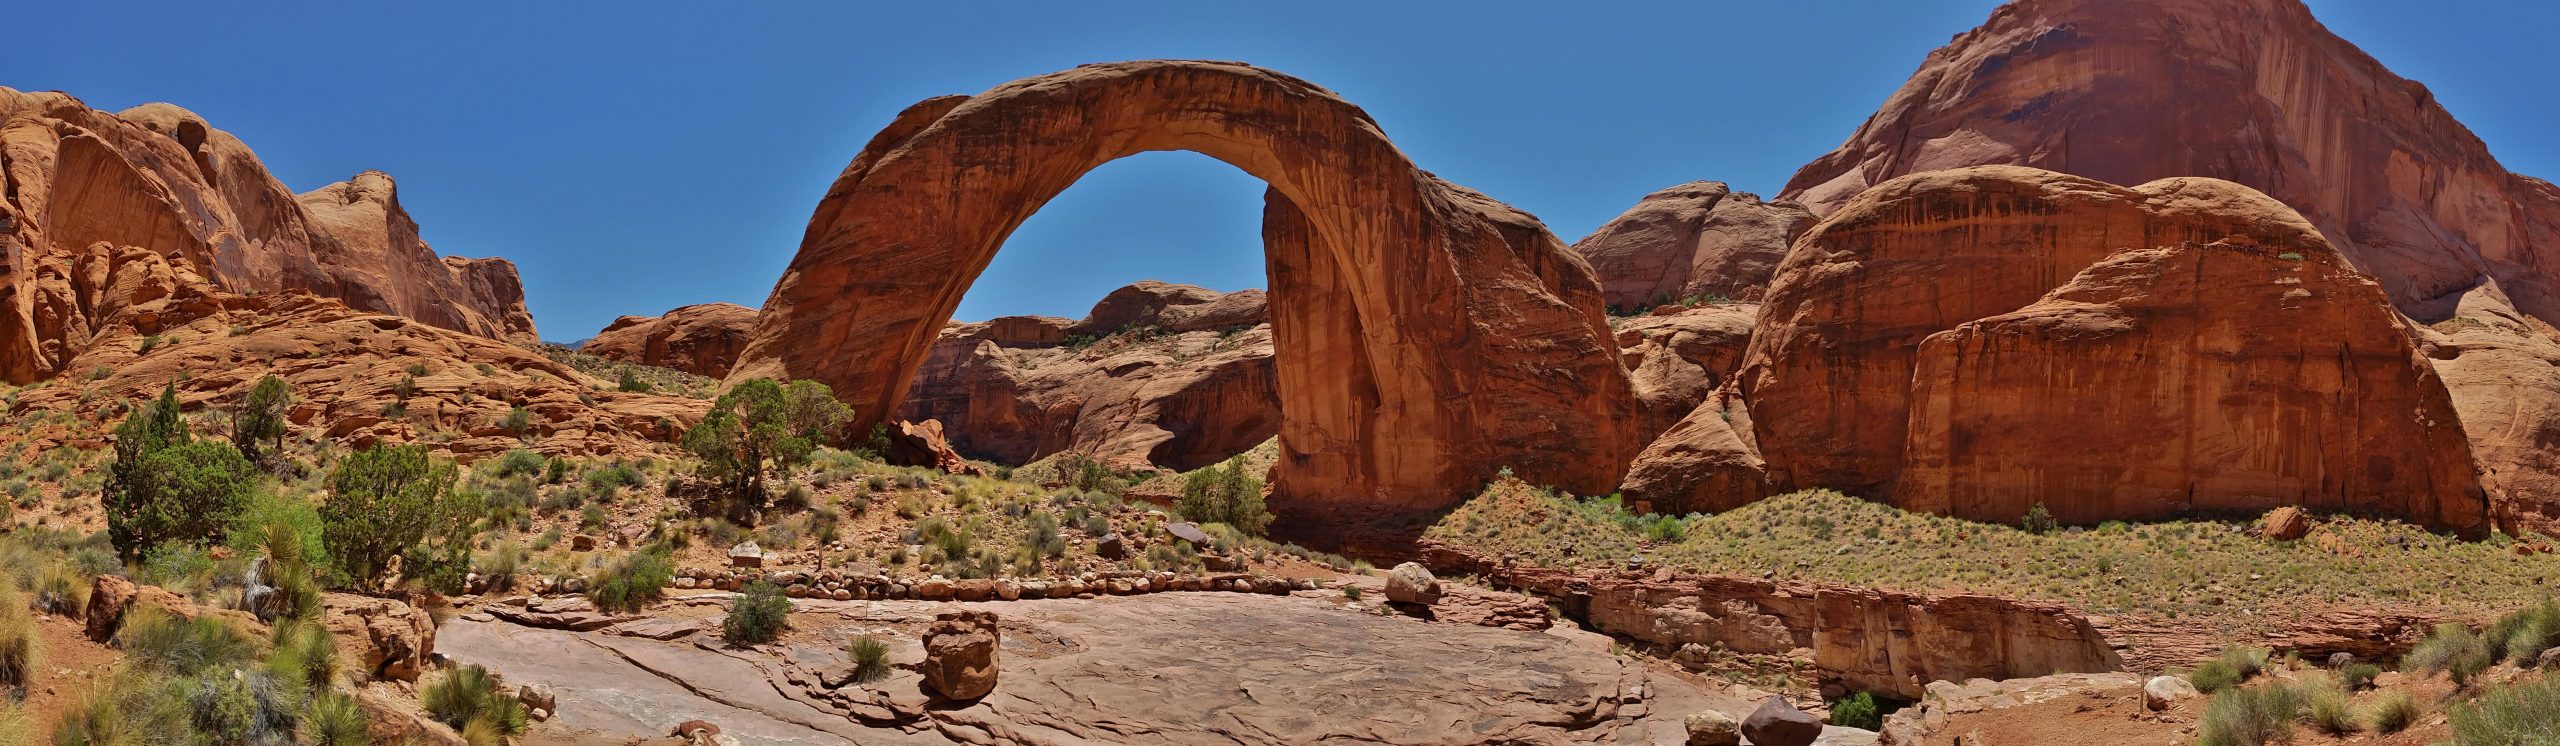 The span of Rainbow Bridge is approximately 290 ft tall, spans 275 ft and the top is 42 feet thick and 33 feet wide.